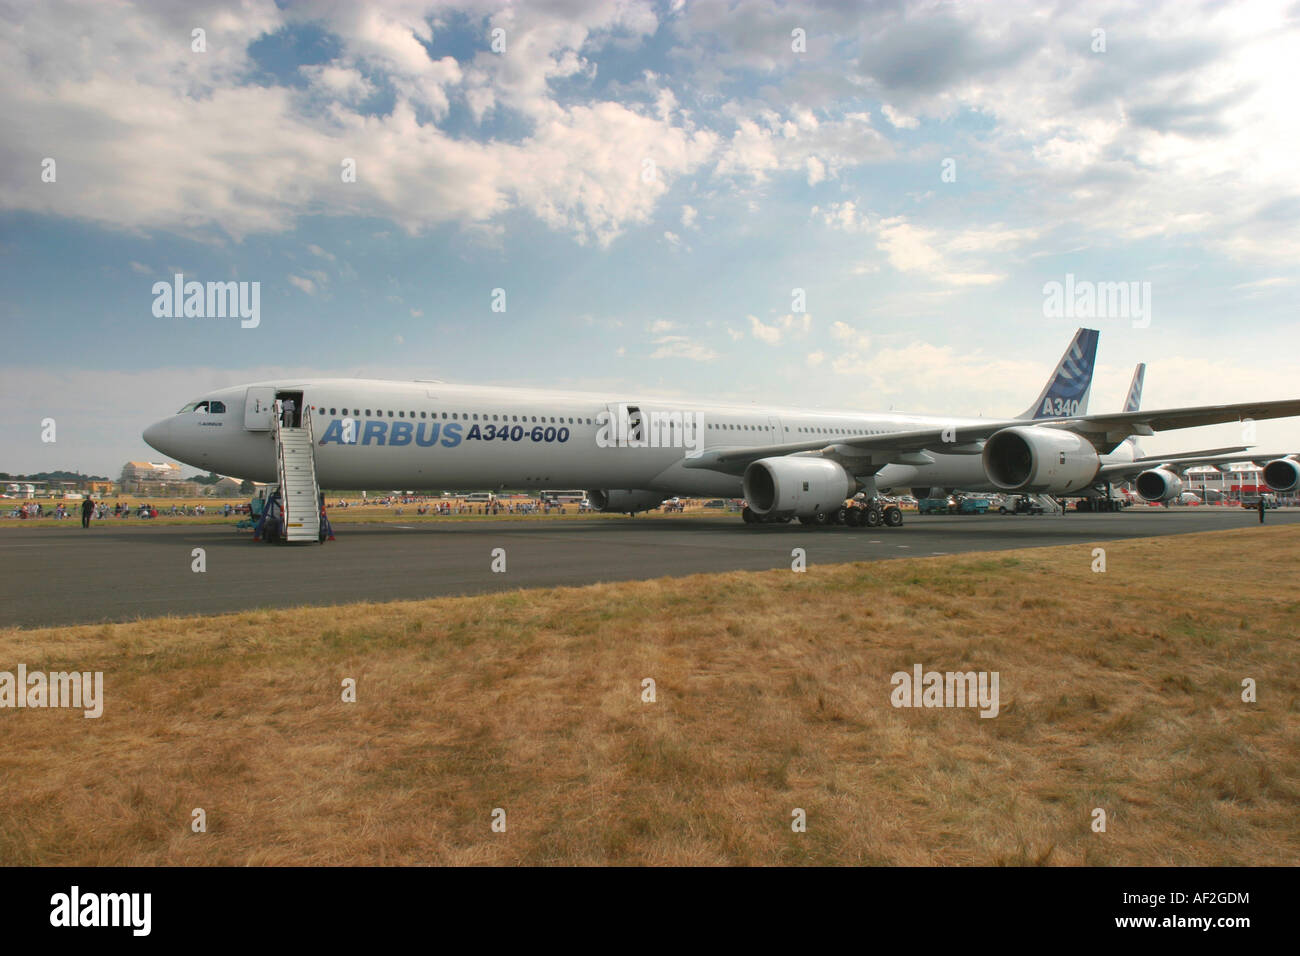 Airbus A340 600 long range four engined commercial passenger airliner. Farnborough, England, UK. Stock Photo